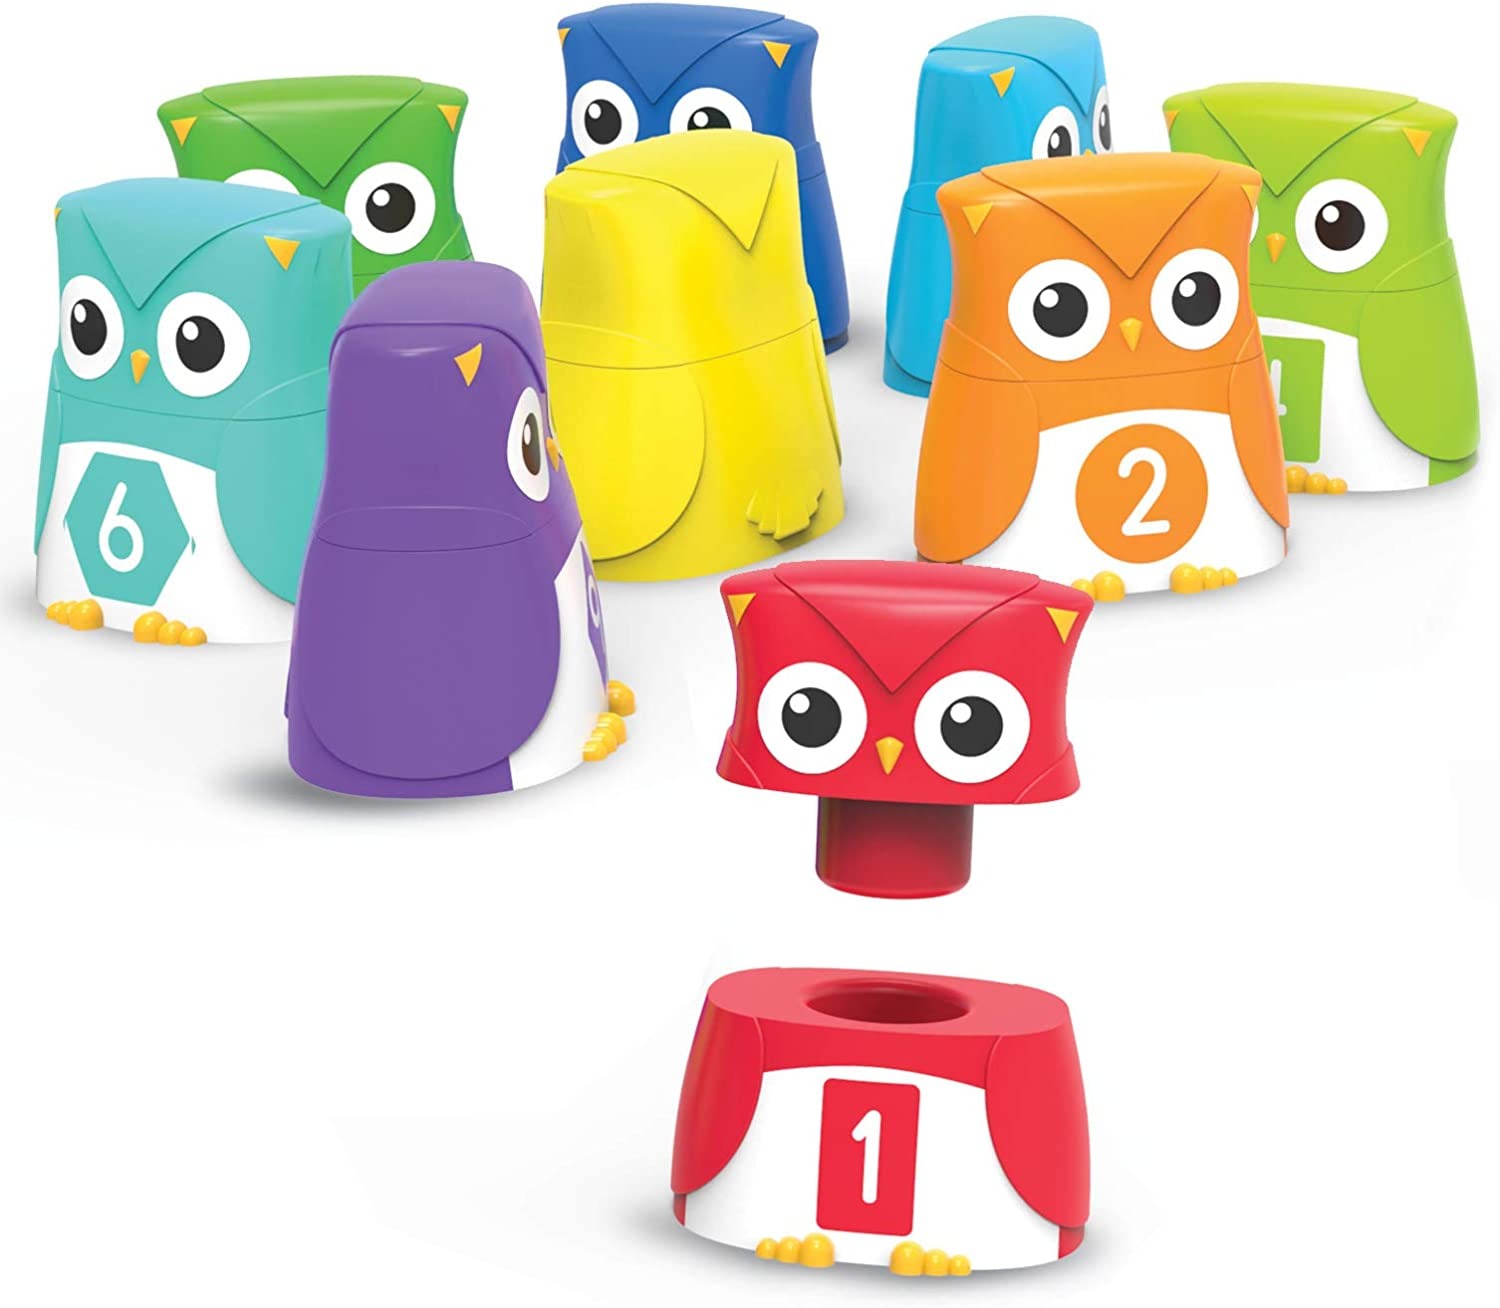 Snap-n-Learn Owls, These fun Snap-n-Learn Owls flew over the rainbow! Introduce toddlers to early colour, shape, and number skills with the Snap-n-Learn Rainbow Owls from Learning Resources. This set of 10 friendly two-piece owl toys comes in 10 vivid shades drawn from all the colours of the rainbow - learn rosy red, vivid violet, and every shade in between! Sized just right for little hands, each manipulative owl pulls apart and snaps together easily, and encourages mix-and-match play while building fine m